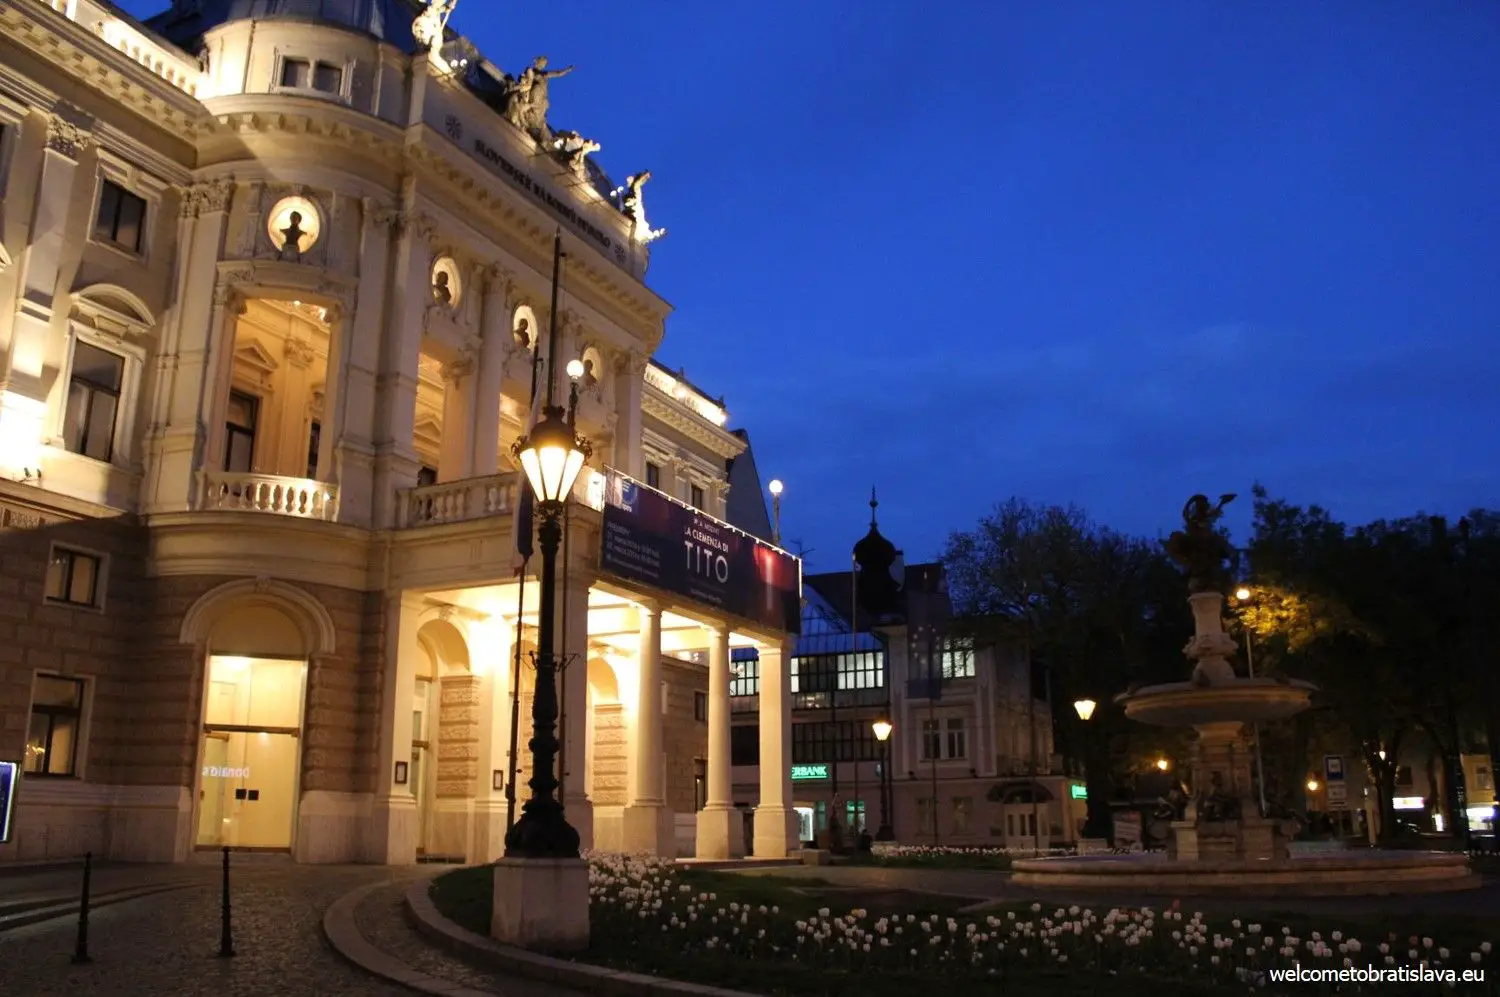 The Slovak National Theater